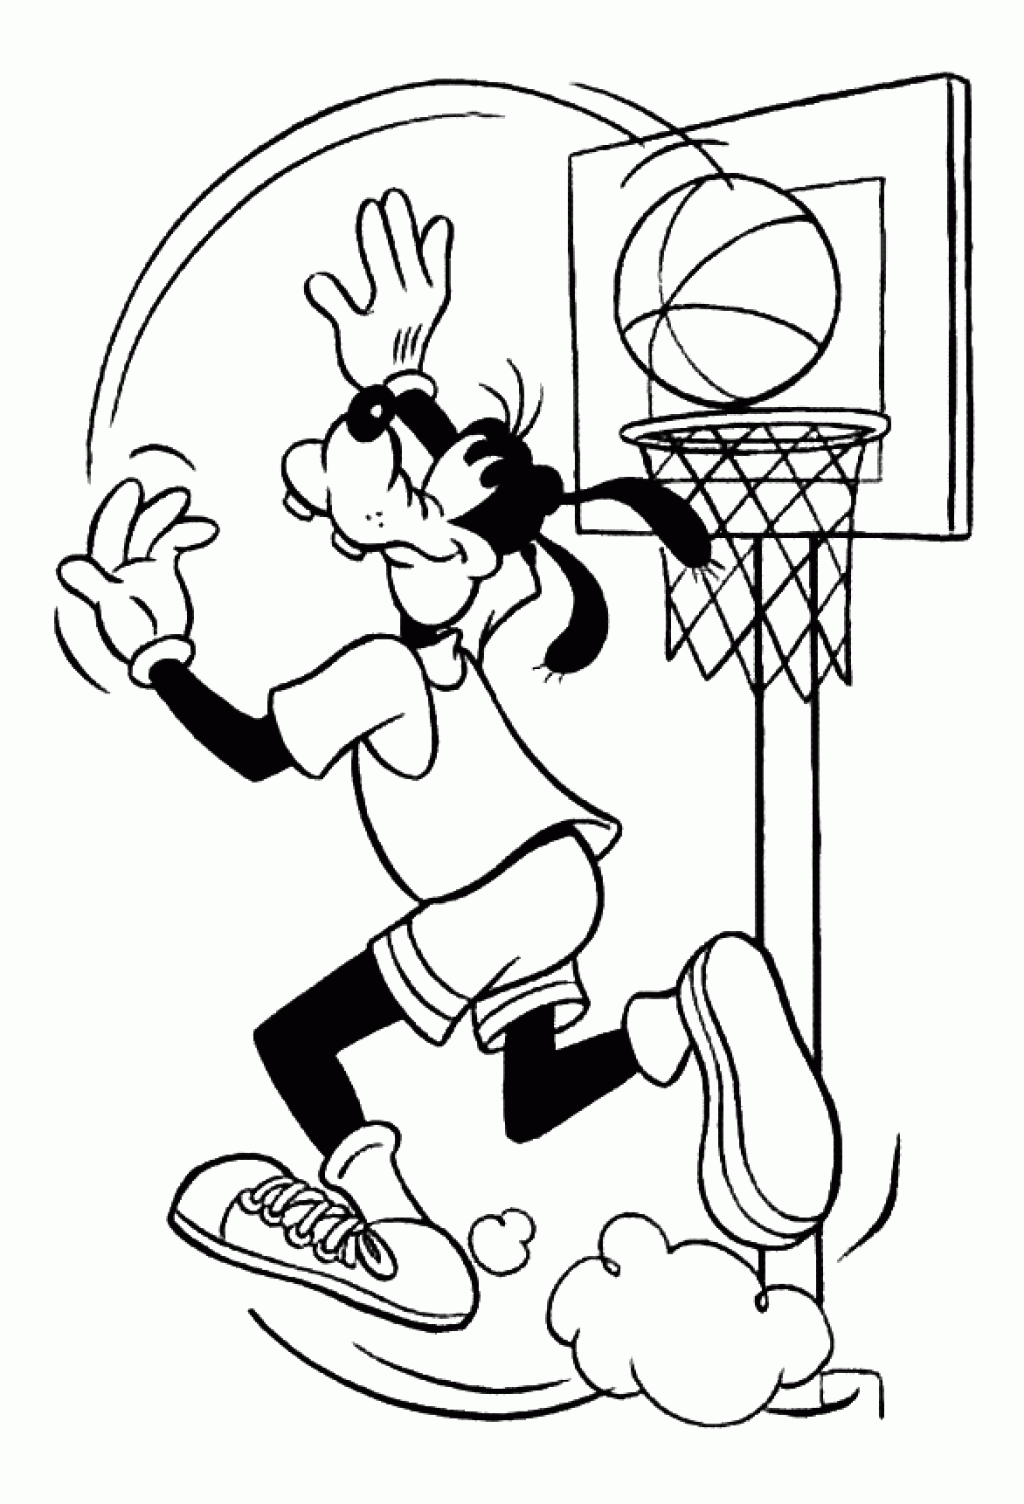 Disney Goofy Basketball Coloring Pages | Cartoon Coloring pages